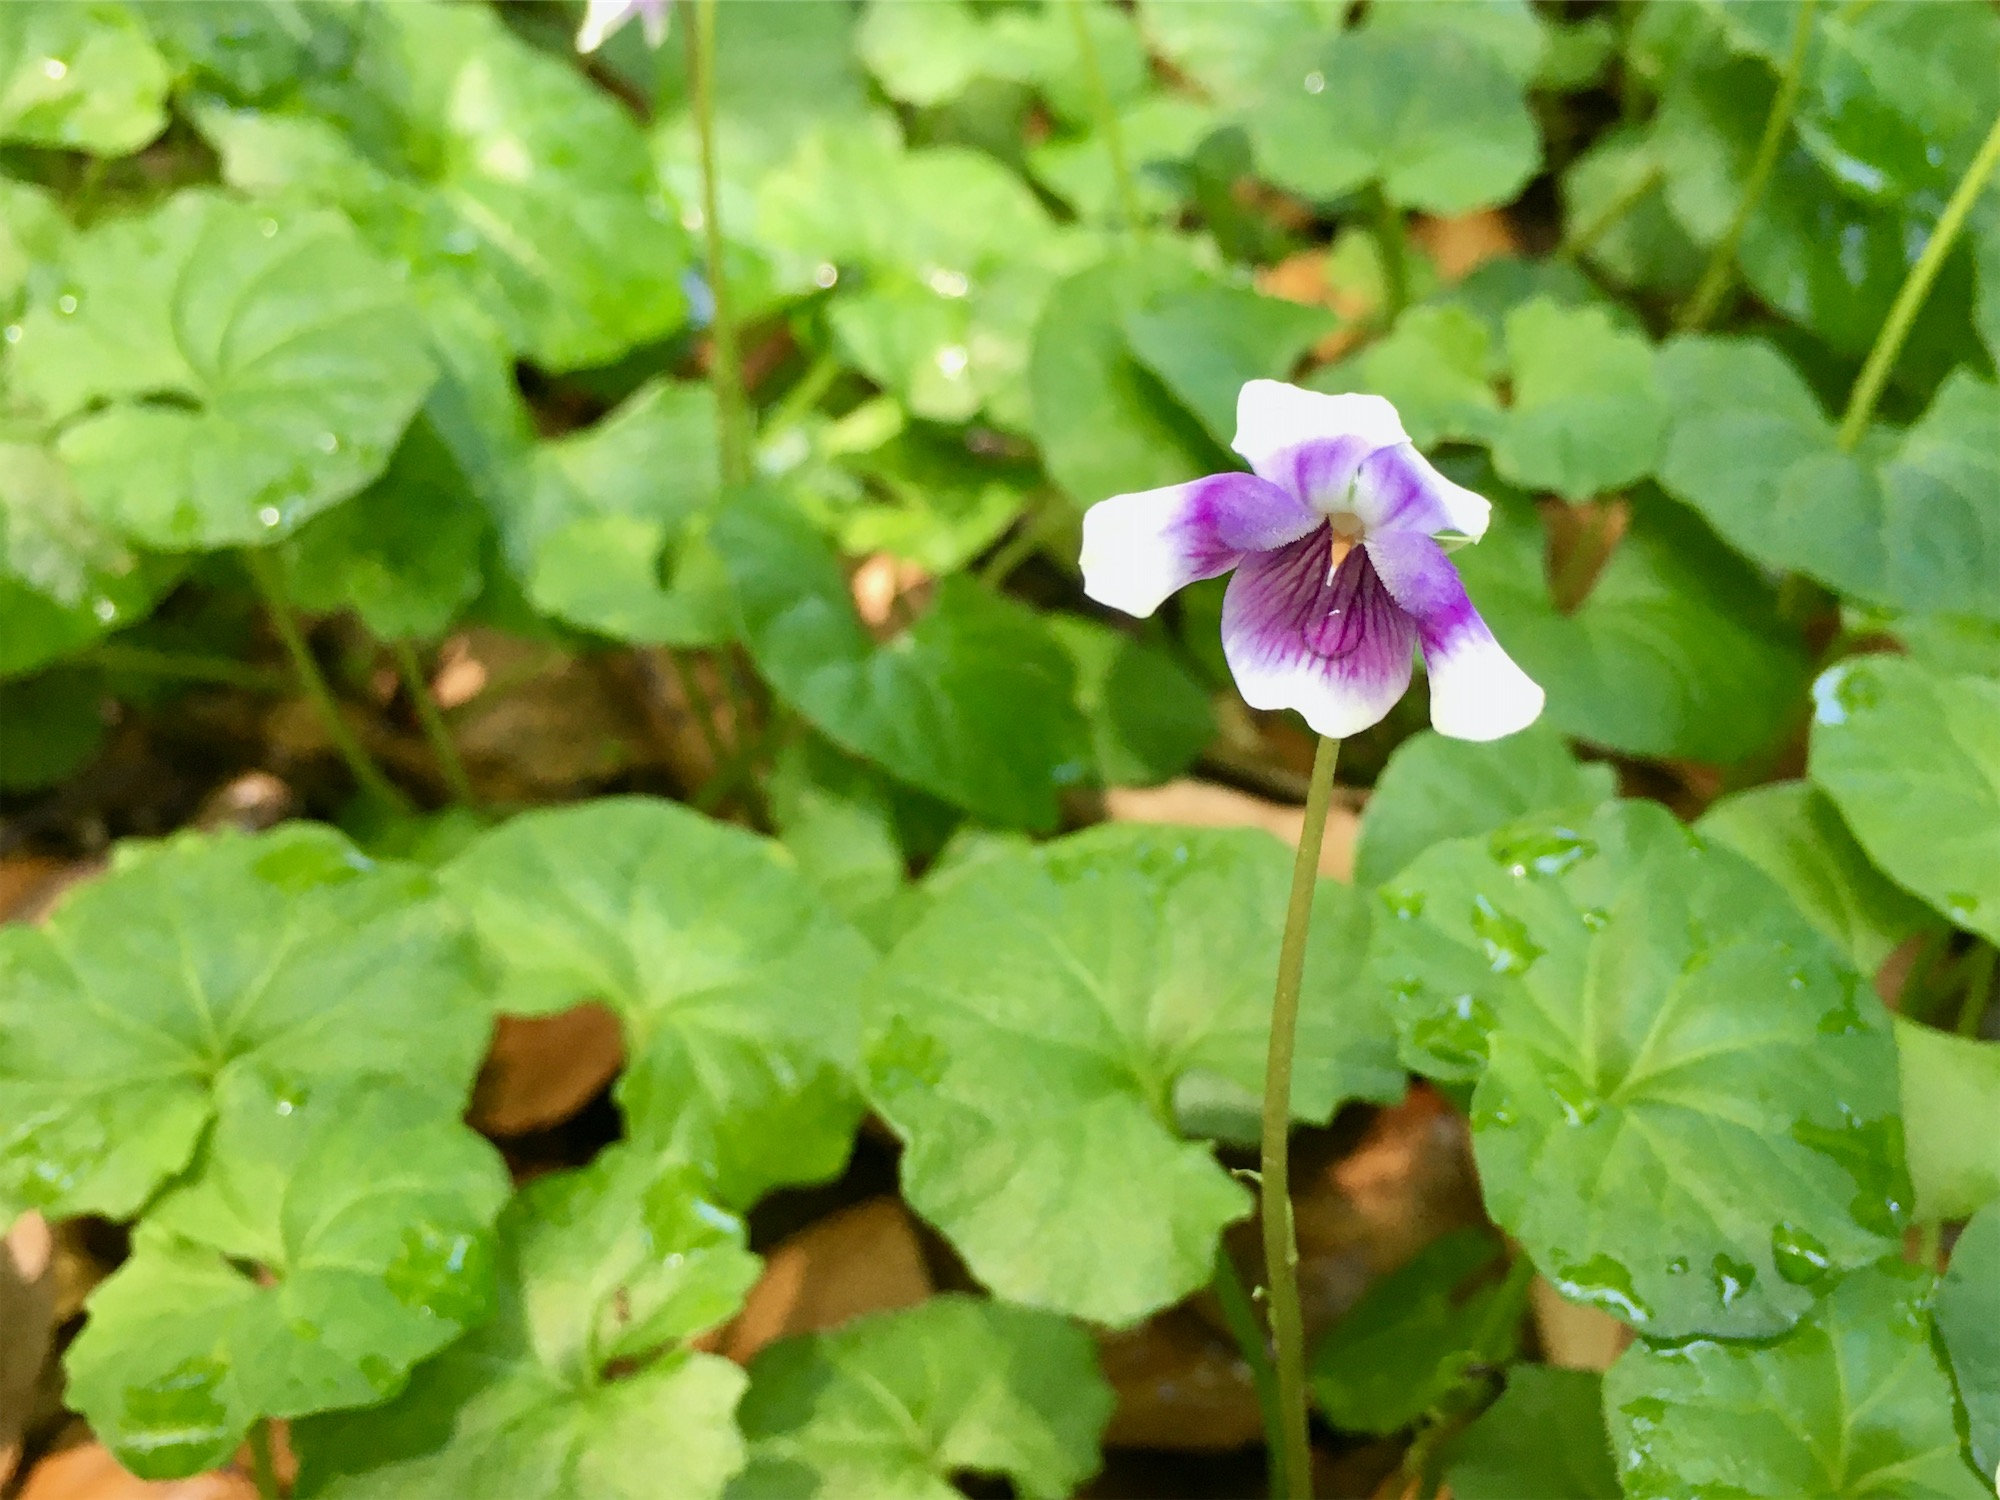 A blue and white violet